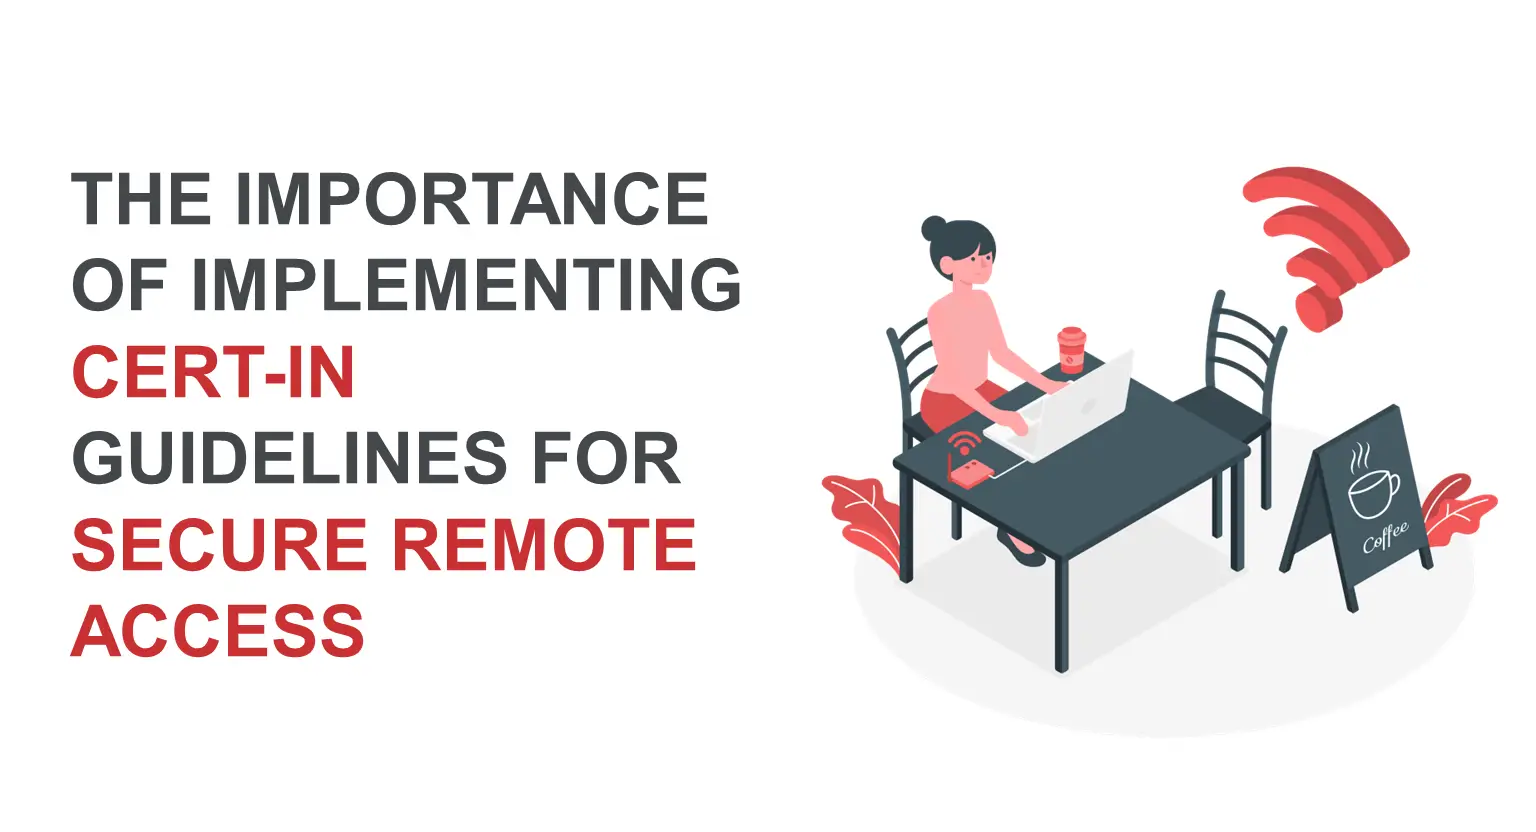 The importance of implementing CERT-In guidelines for secure remote access